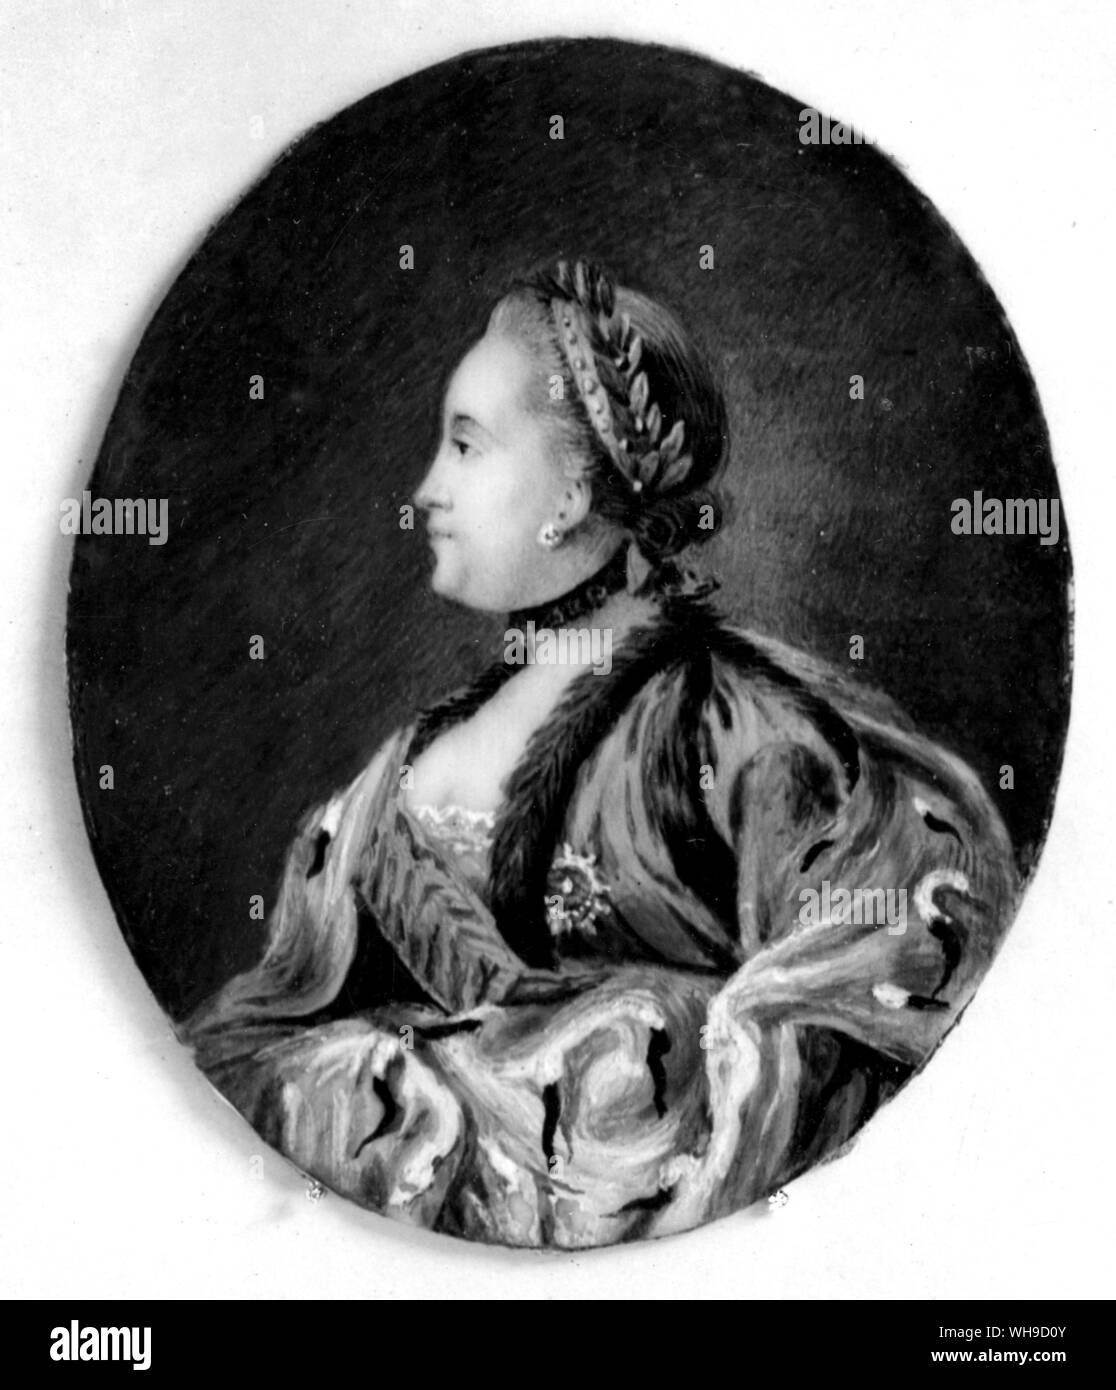 Catherine (II) the Great, Empress of Russia (1729-1796). She was Empress from 1762. Stock Photo